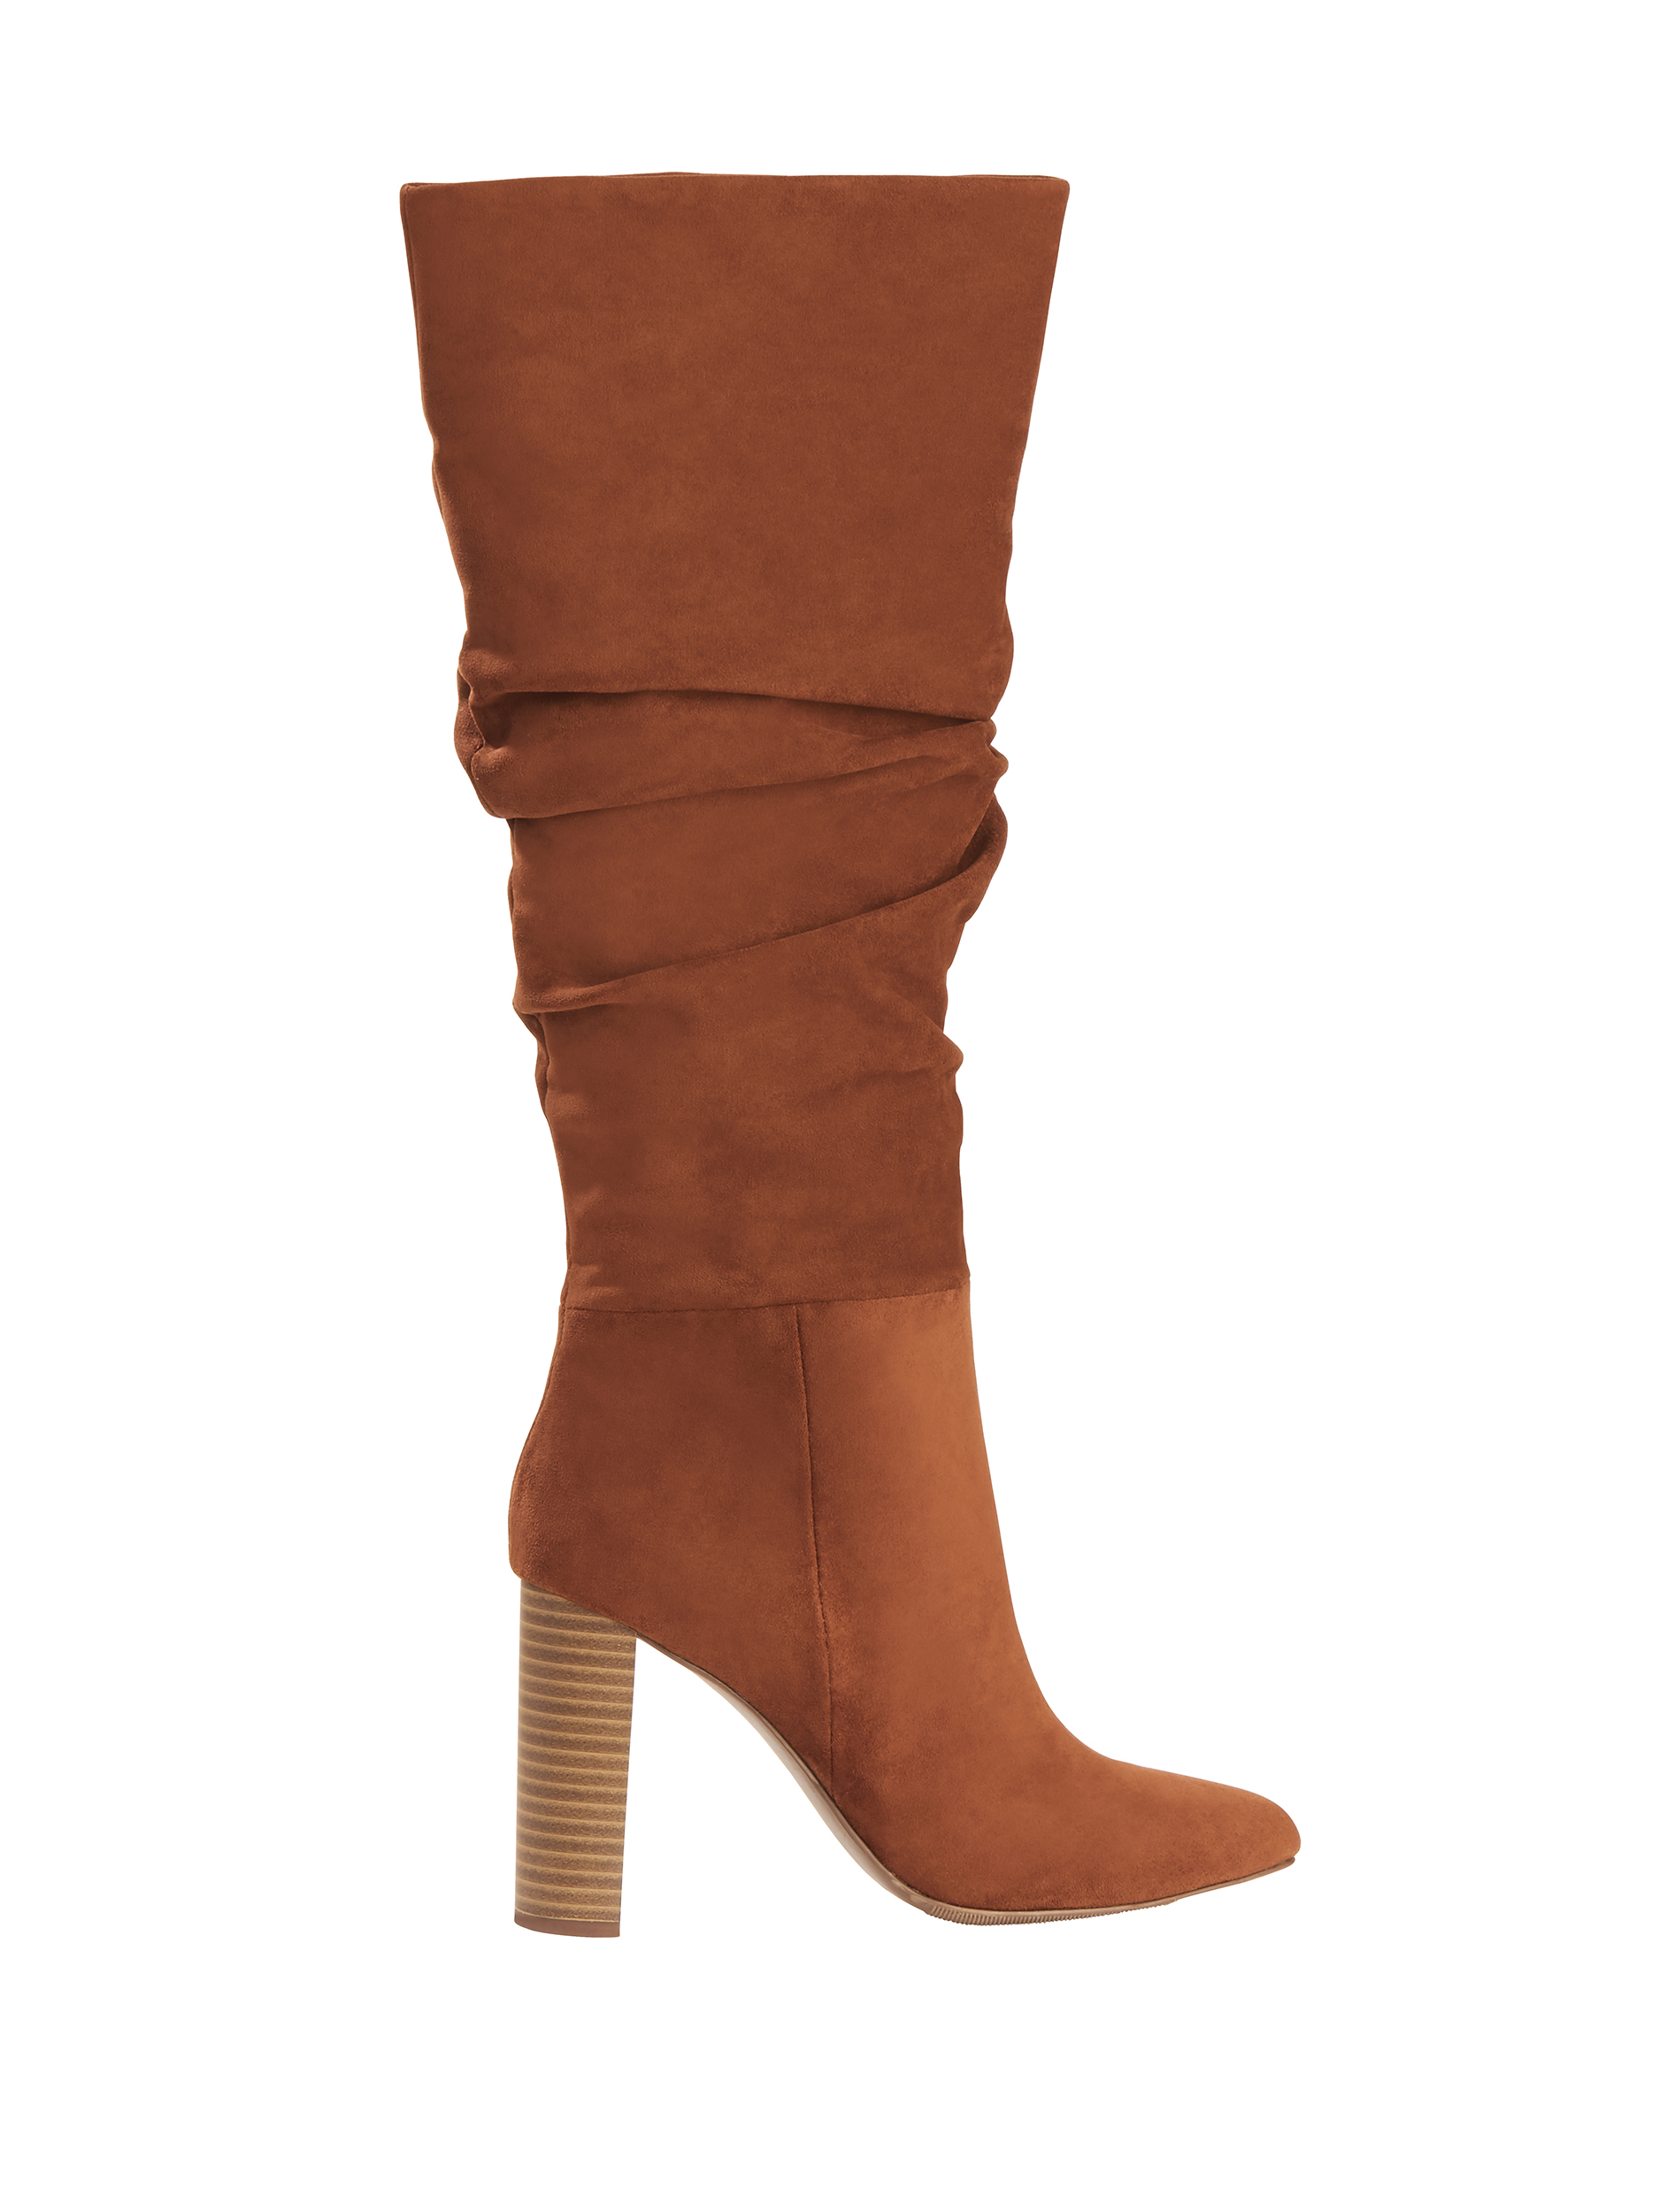 Scoop Women’s Penny Microsuede Slouch Boots - image 3 of 6